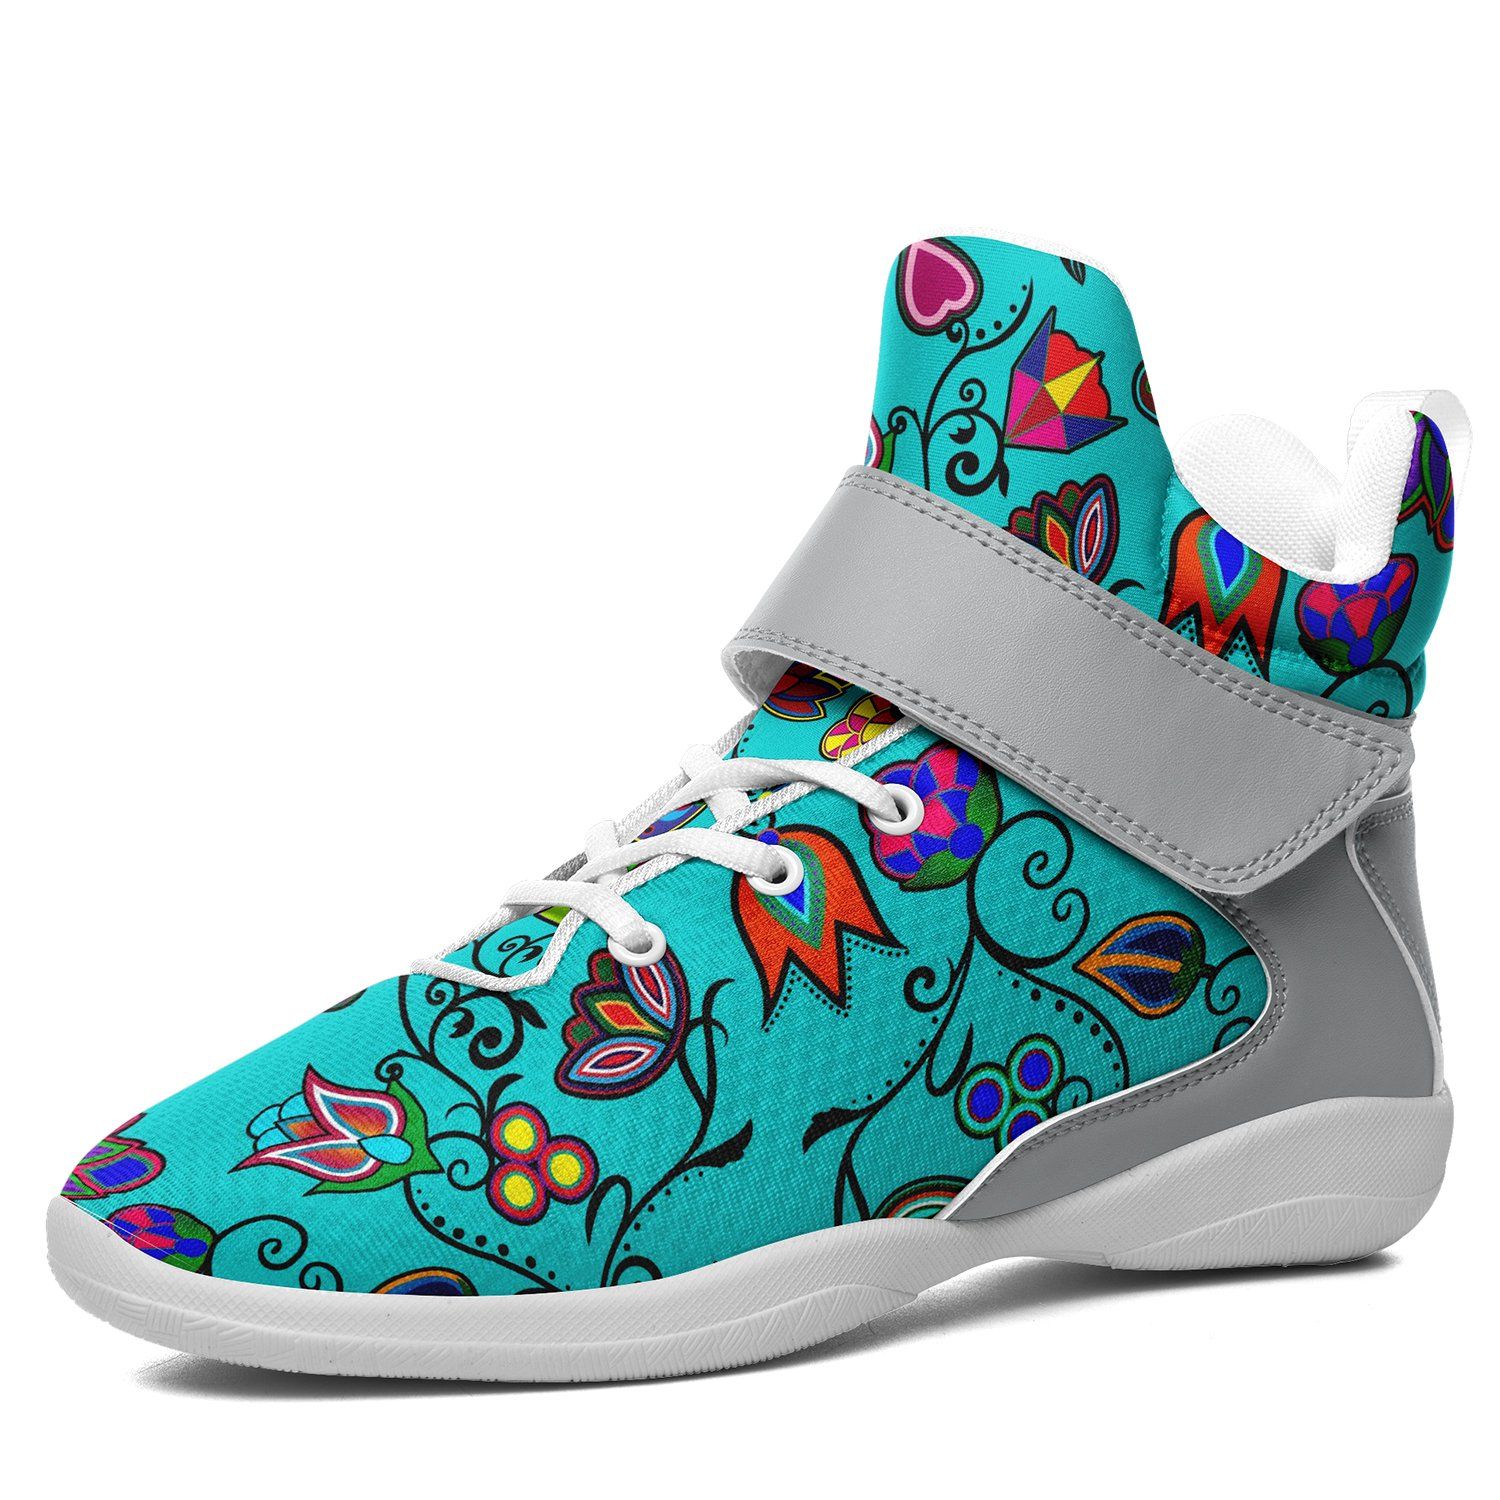 Indigenous Paisley Sky Ipottaa Basketball / Sport High Top Shoes 49 Dzine US Women 4.5 / US Youth 3.5 / EUR 35 White Sole with Gray Strap 